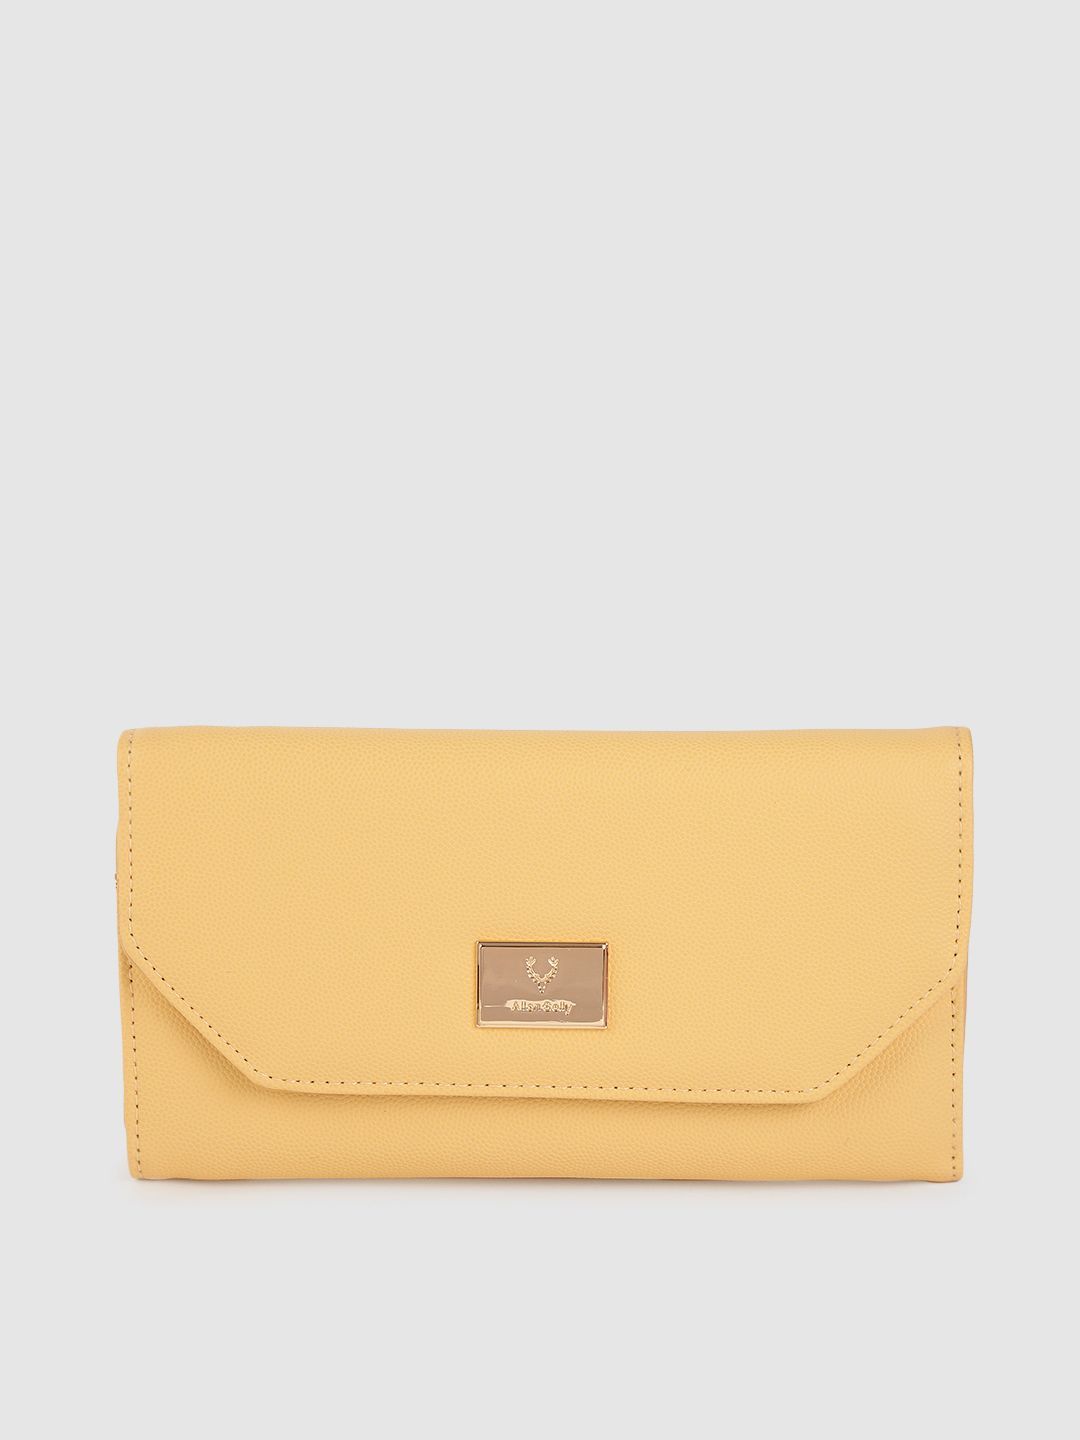 Allen Solly Women Yellow Solid Three Fold Wallet Price in India